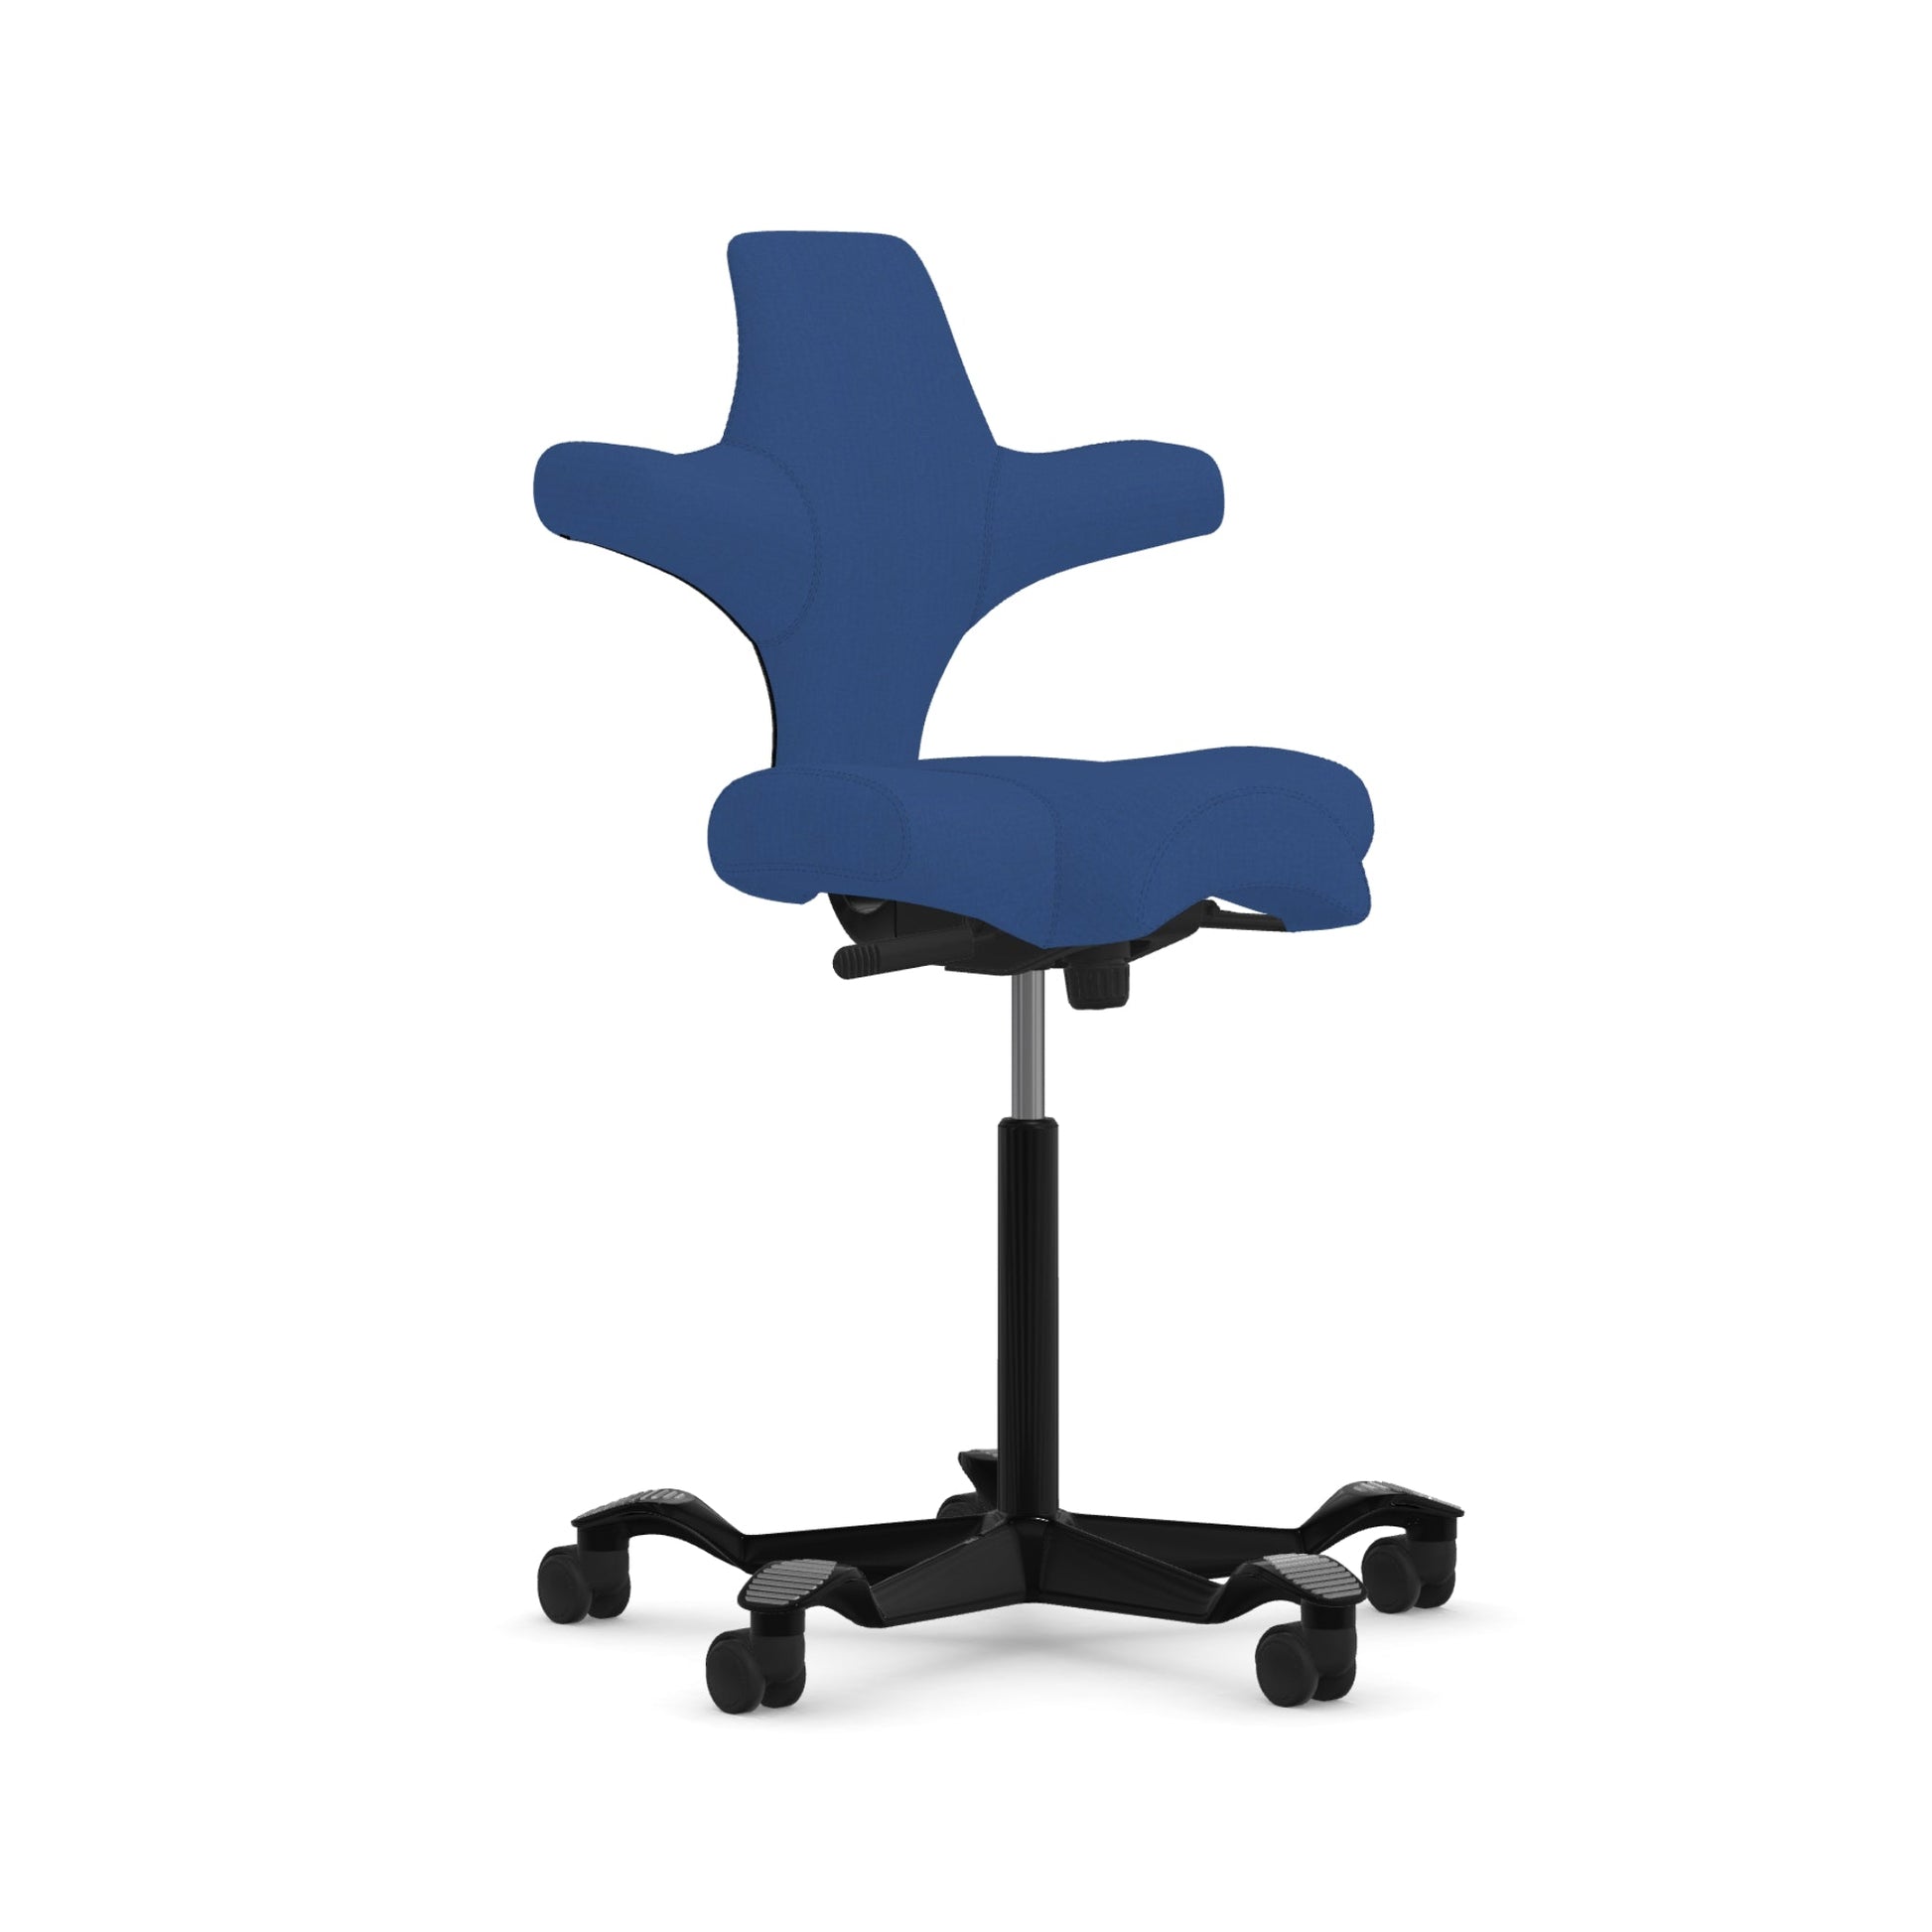 Ergonomic office chairs: A visual history. (PHOTOS)